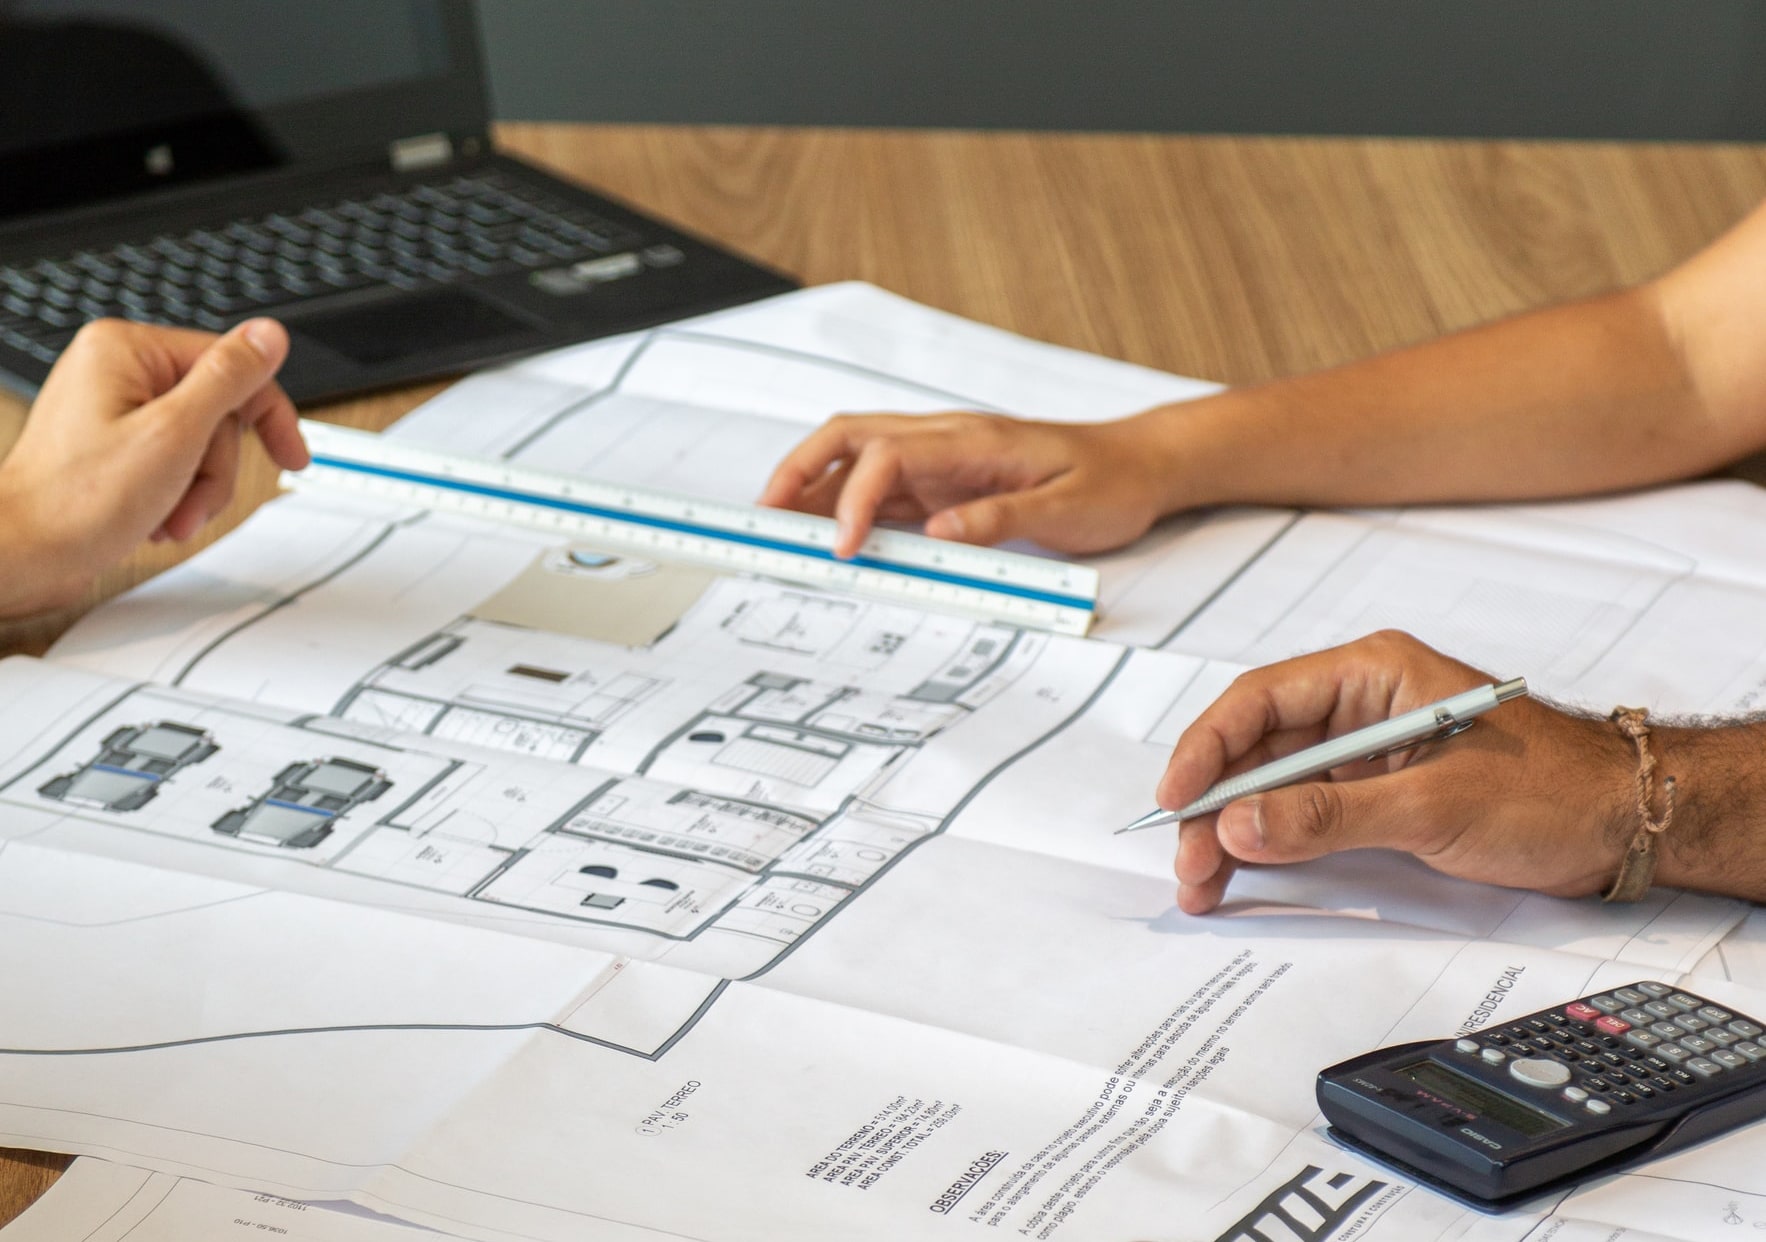 How to Find the Best Free Floor Plan Software for Your Next Project?